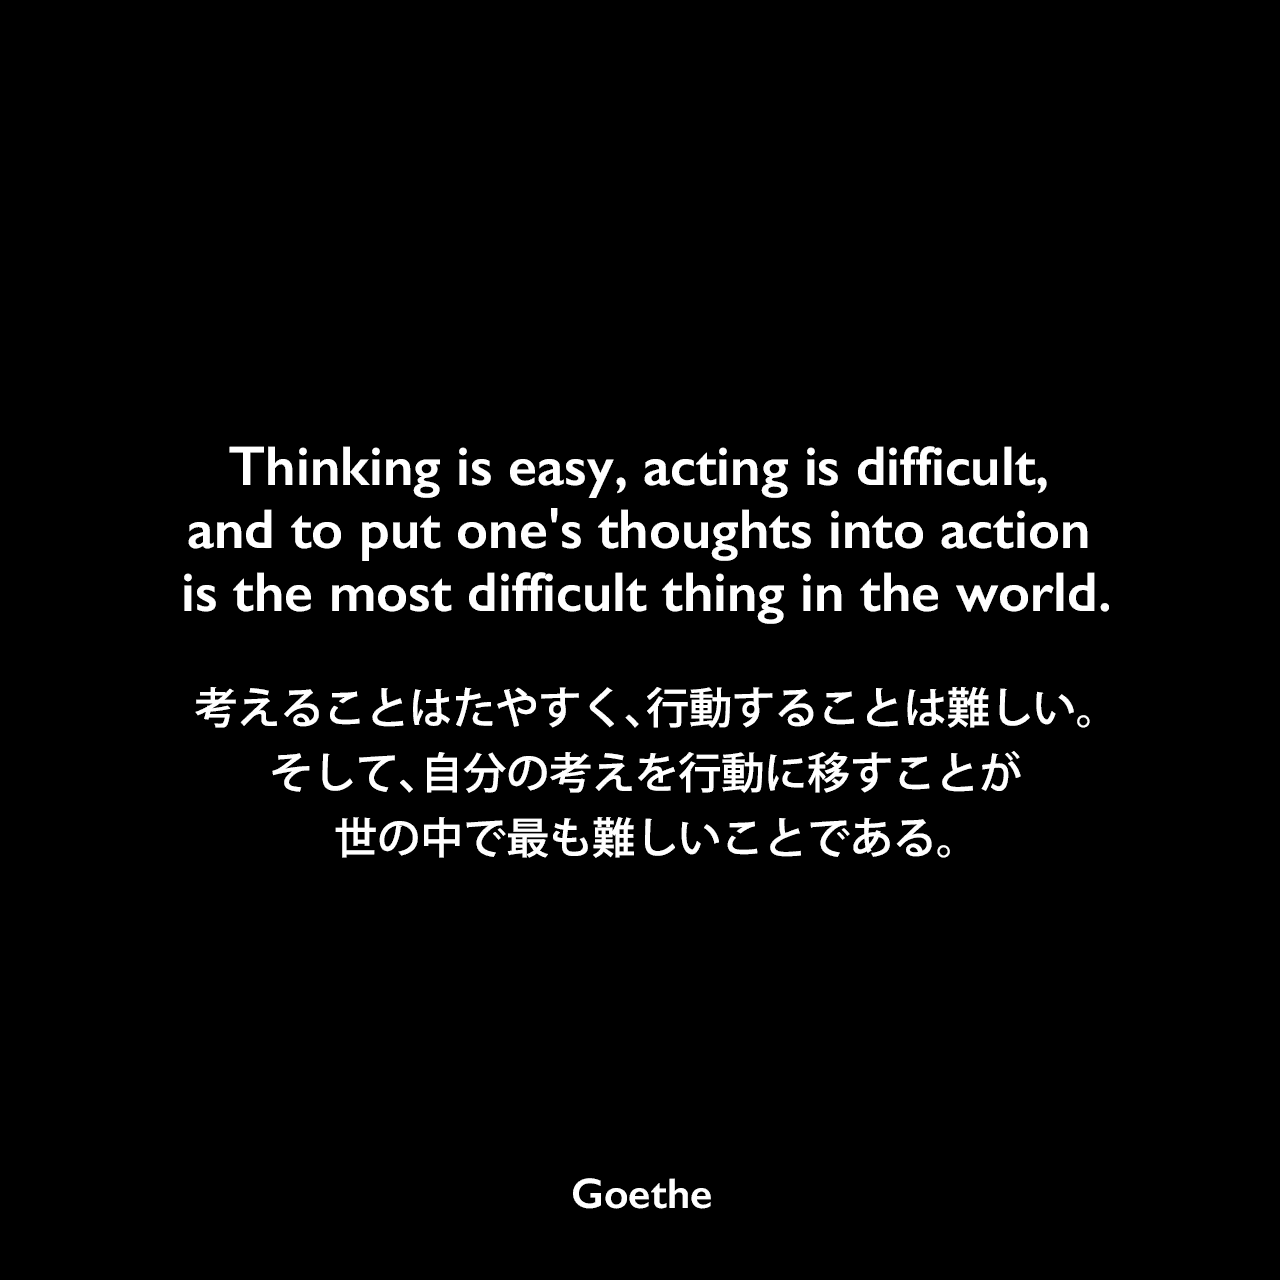 Thinking is easy, acting is difficult, and to put one’s thoughts into action is the most difficult thing in the world.考えることはたやすく、行動することは難しい。そして、自分の考えを行動に移すことが世の中で最も難しいことである。